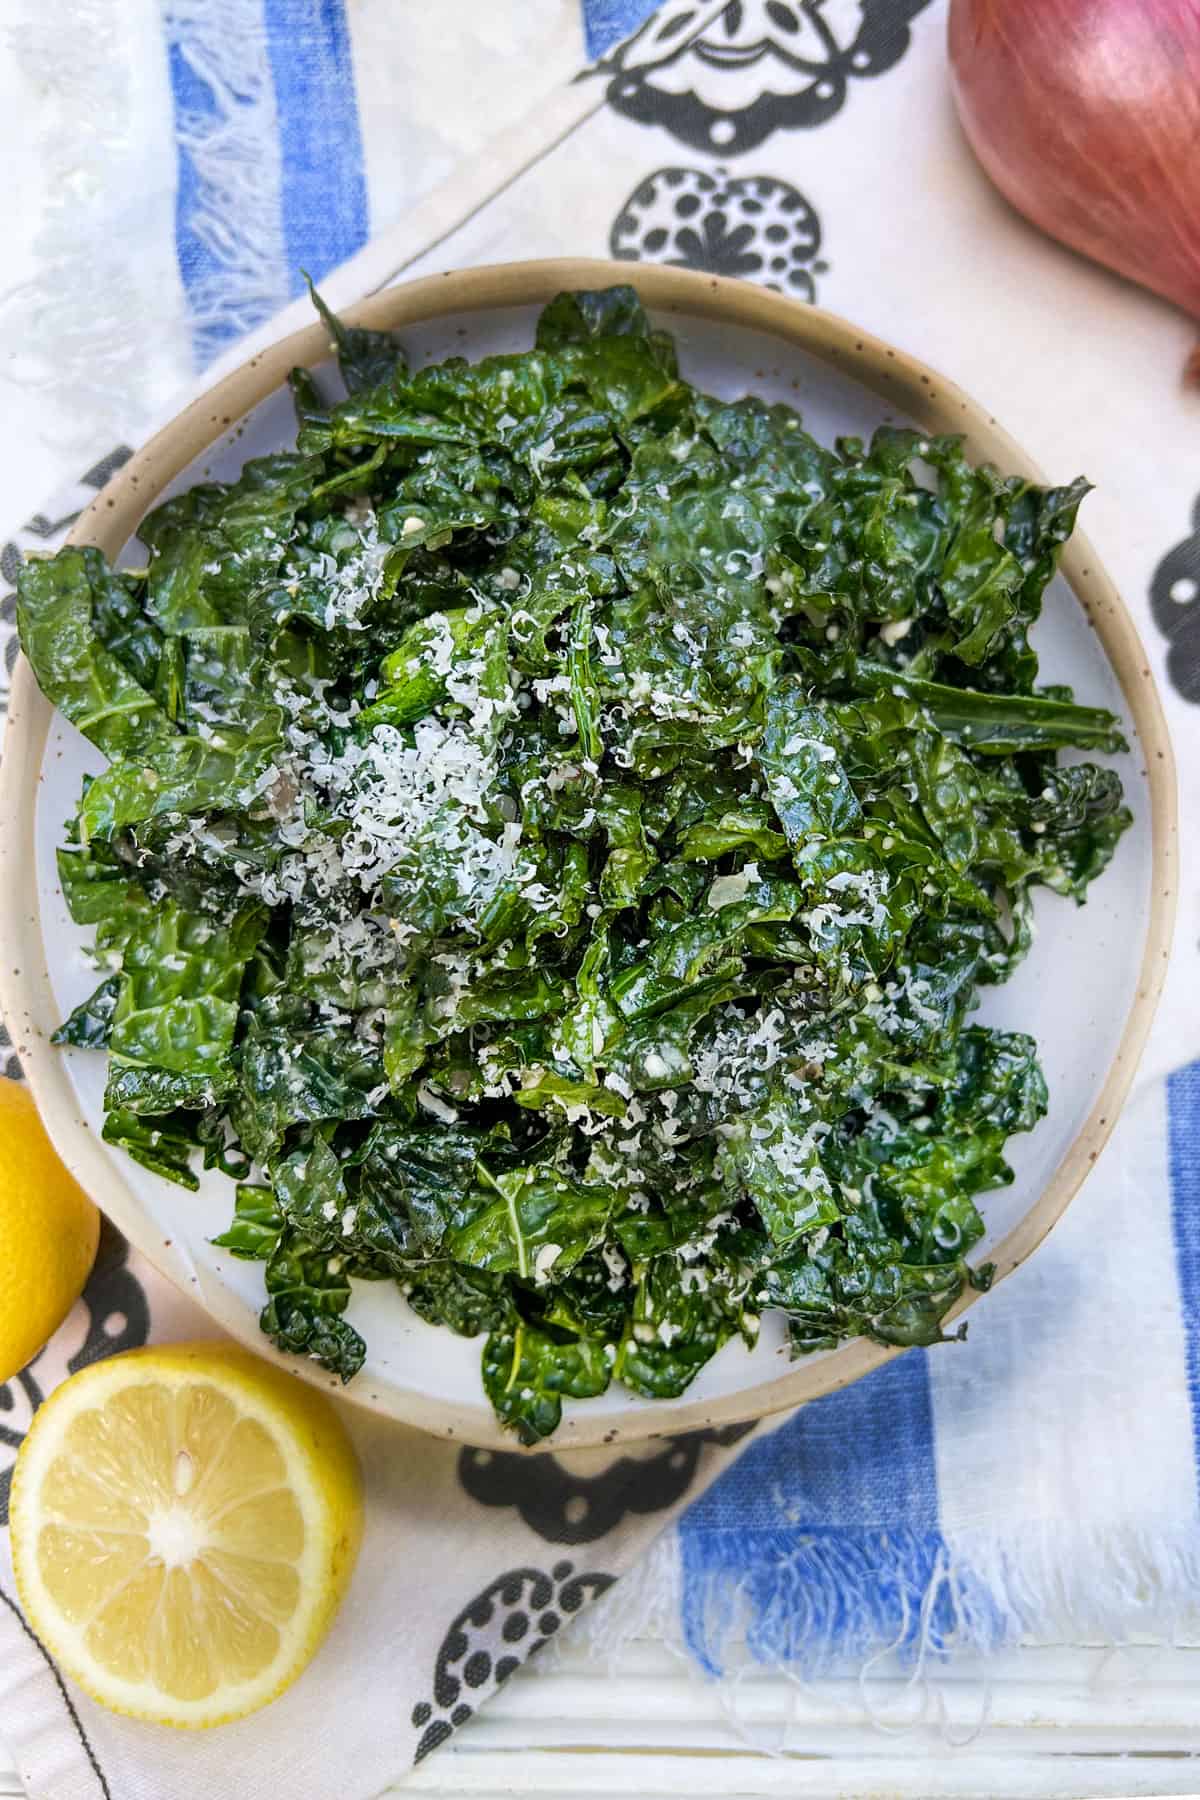 A bowl of shredded kale salad with dressing and a sprinkling of finely grated parmesan cheese. A cut lemon to one side and a shallot on the other side.